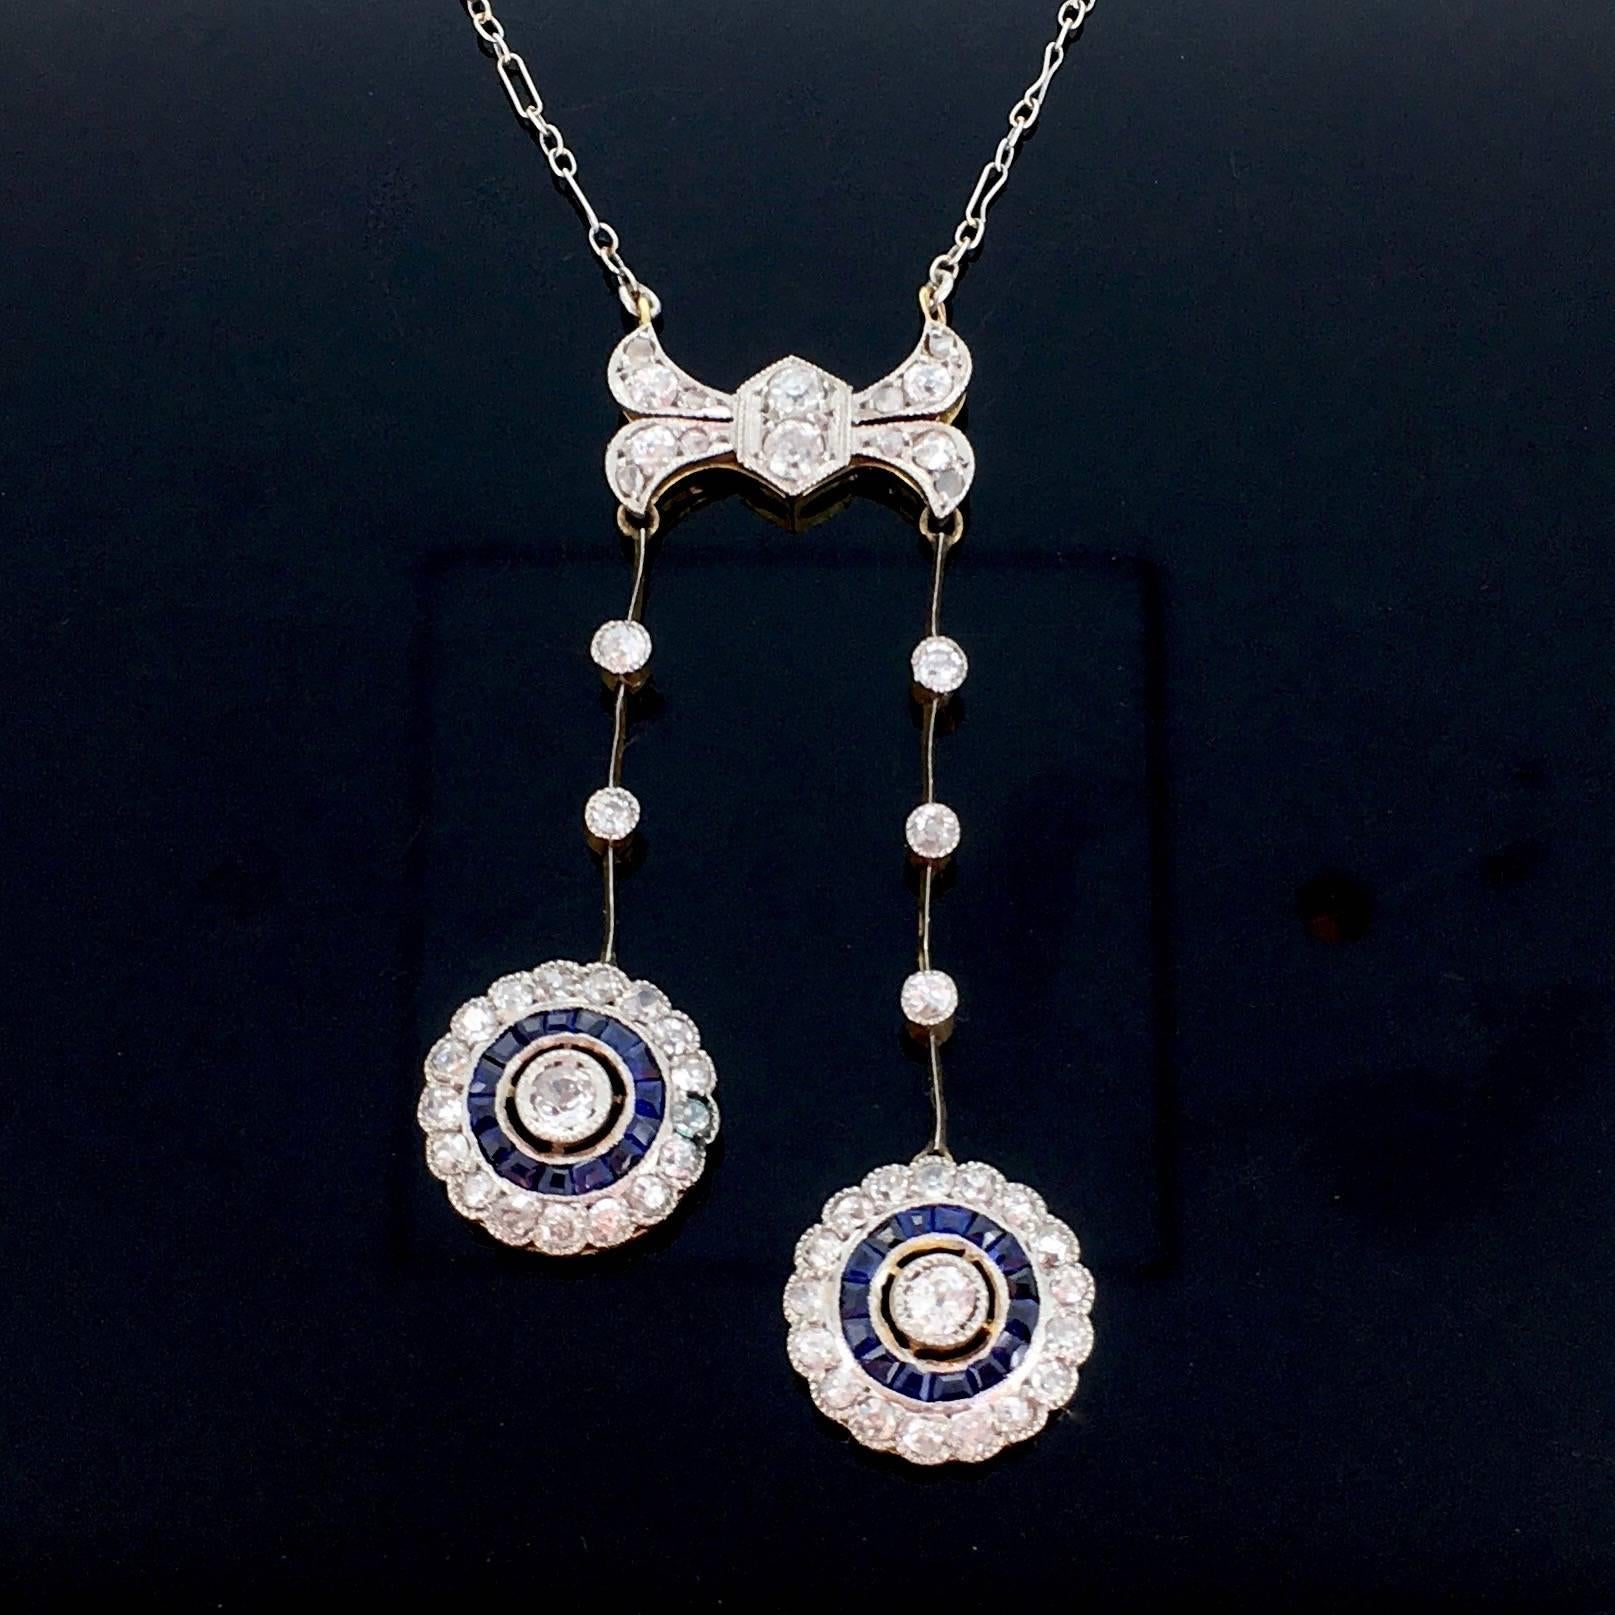 This beautiful Neglige necklace features 2 round drops set with old mine cut diamonds, surrounded with tapered cut naturals sapphires and then again with diamonds. The platinum chain is retaining on the front a knot shaped motif set with old mine